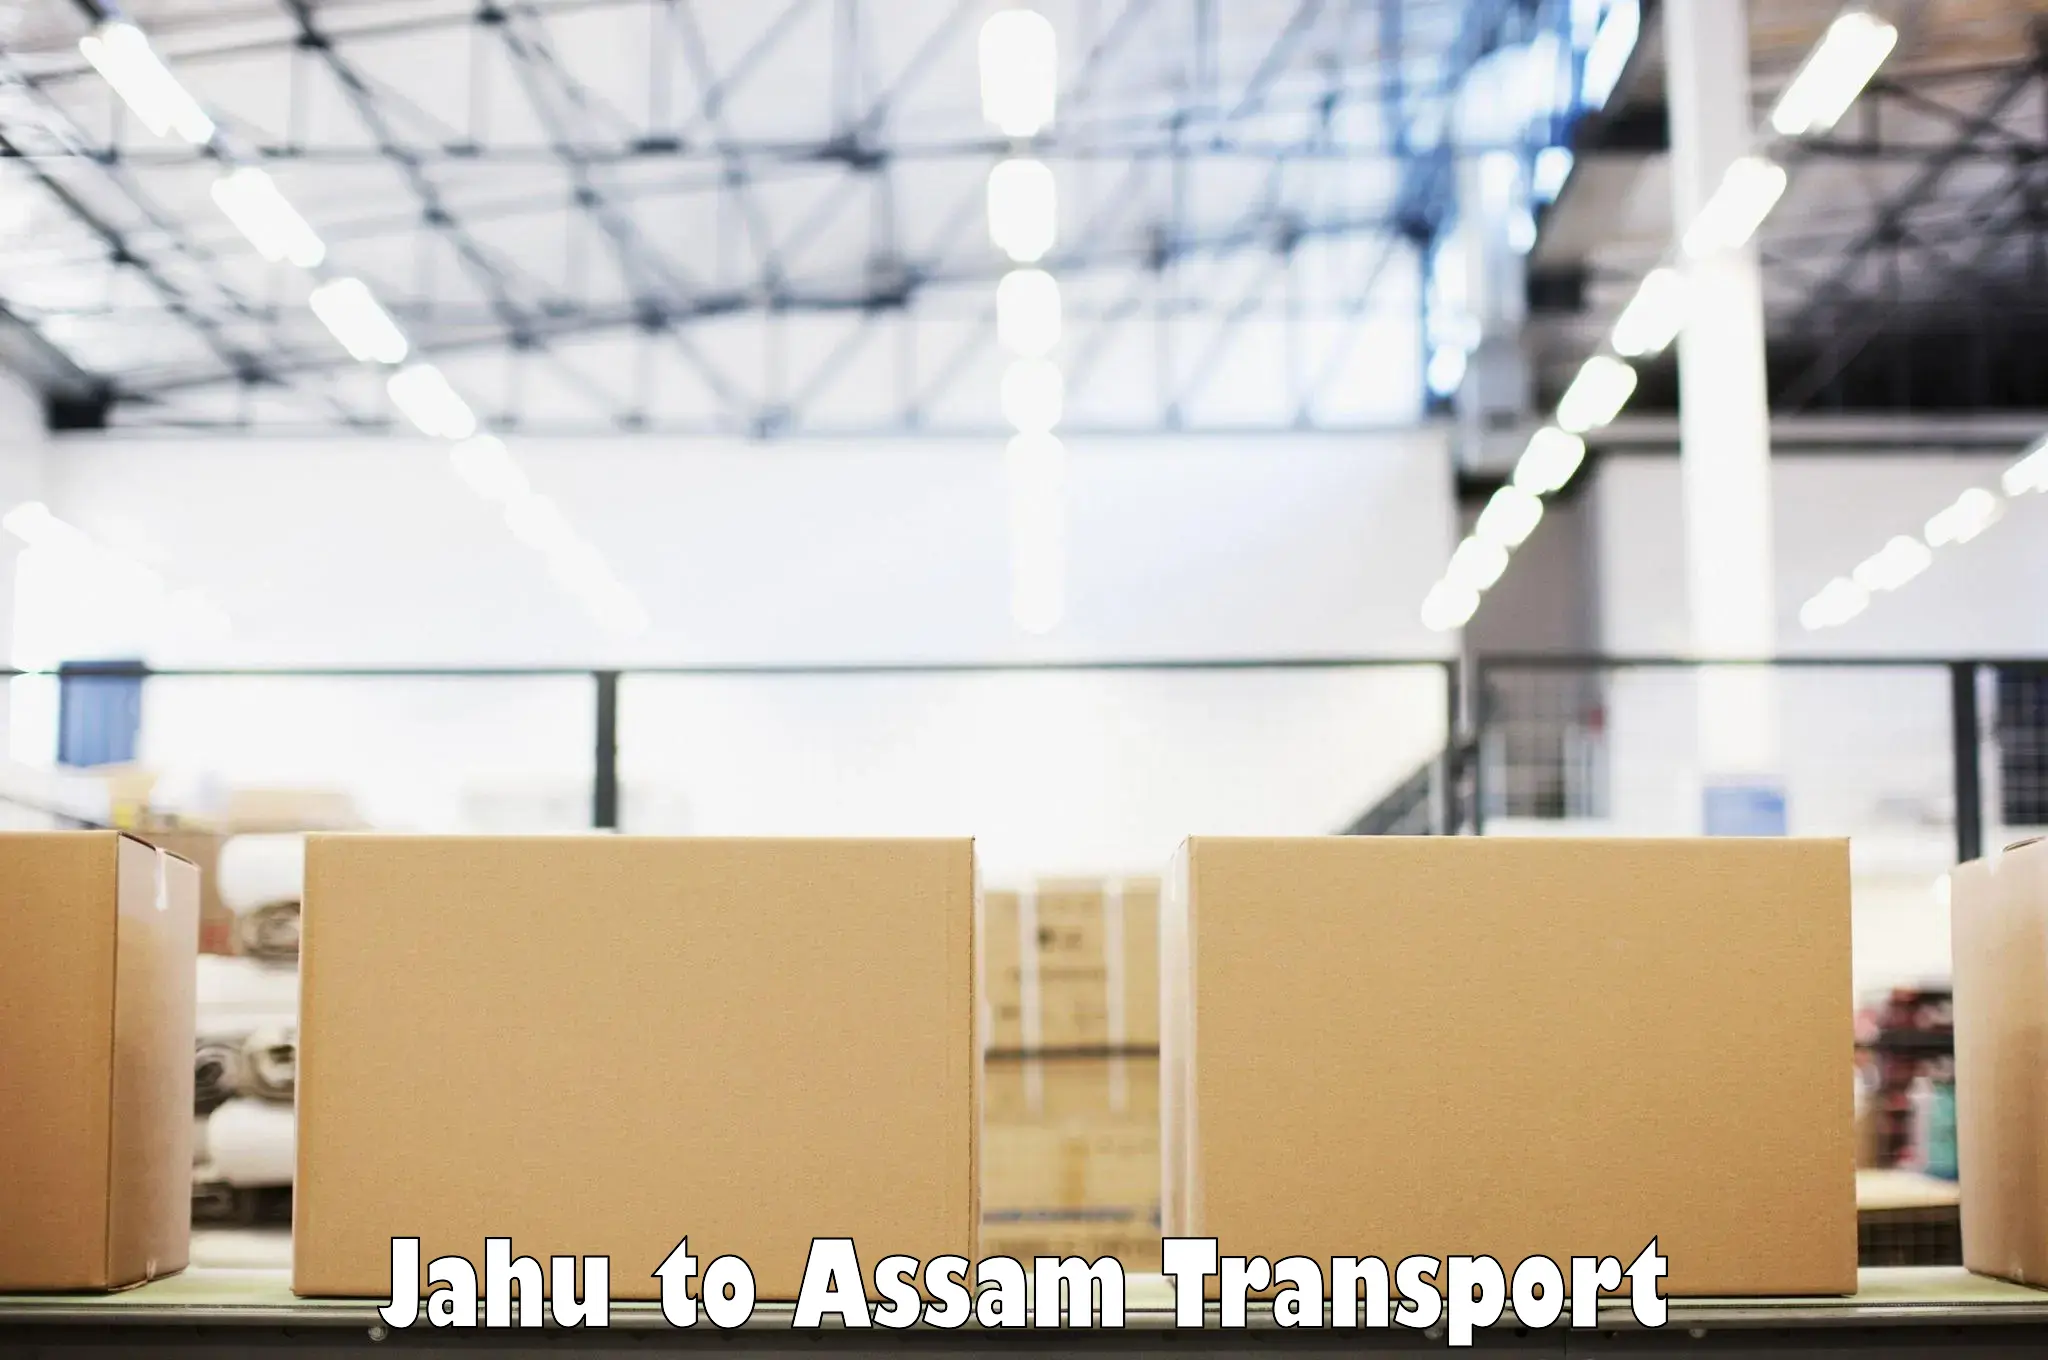 Domestic transport services Jahu to Rupai Siding